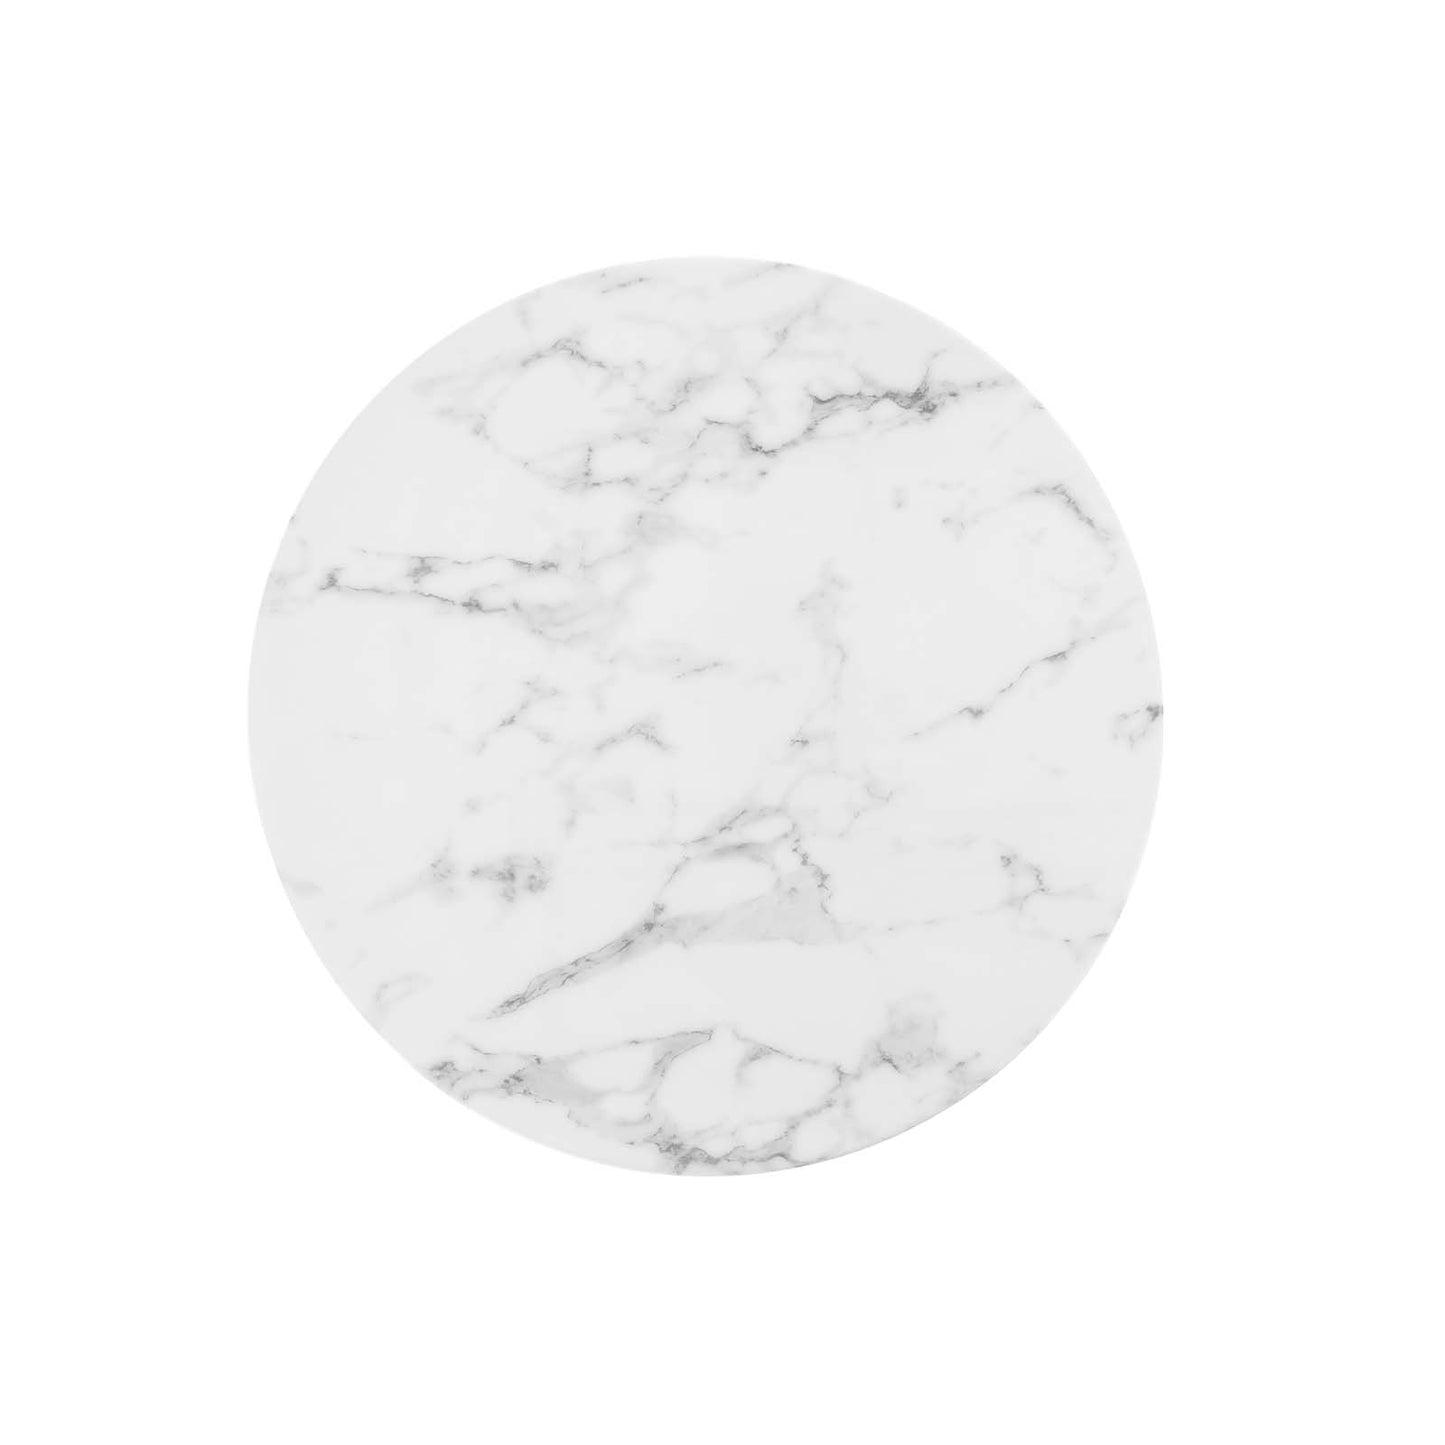 Modway Lippa 28" Artificial Marble Bar Table in White - EEI-1827